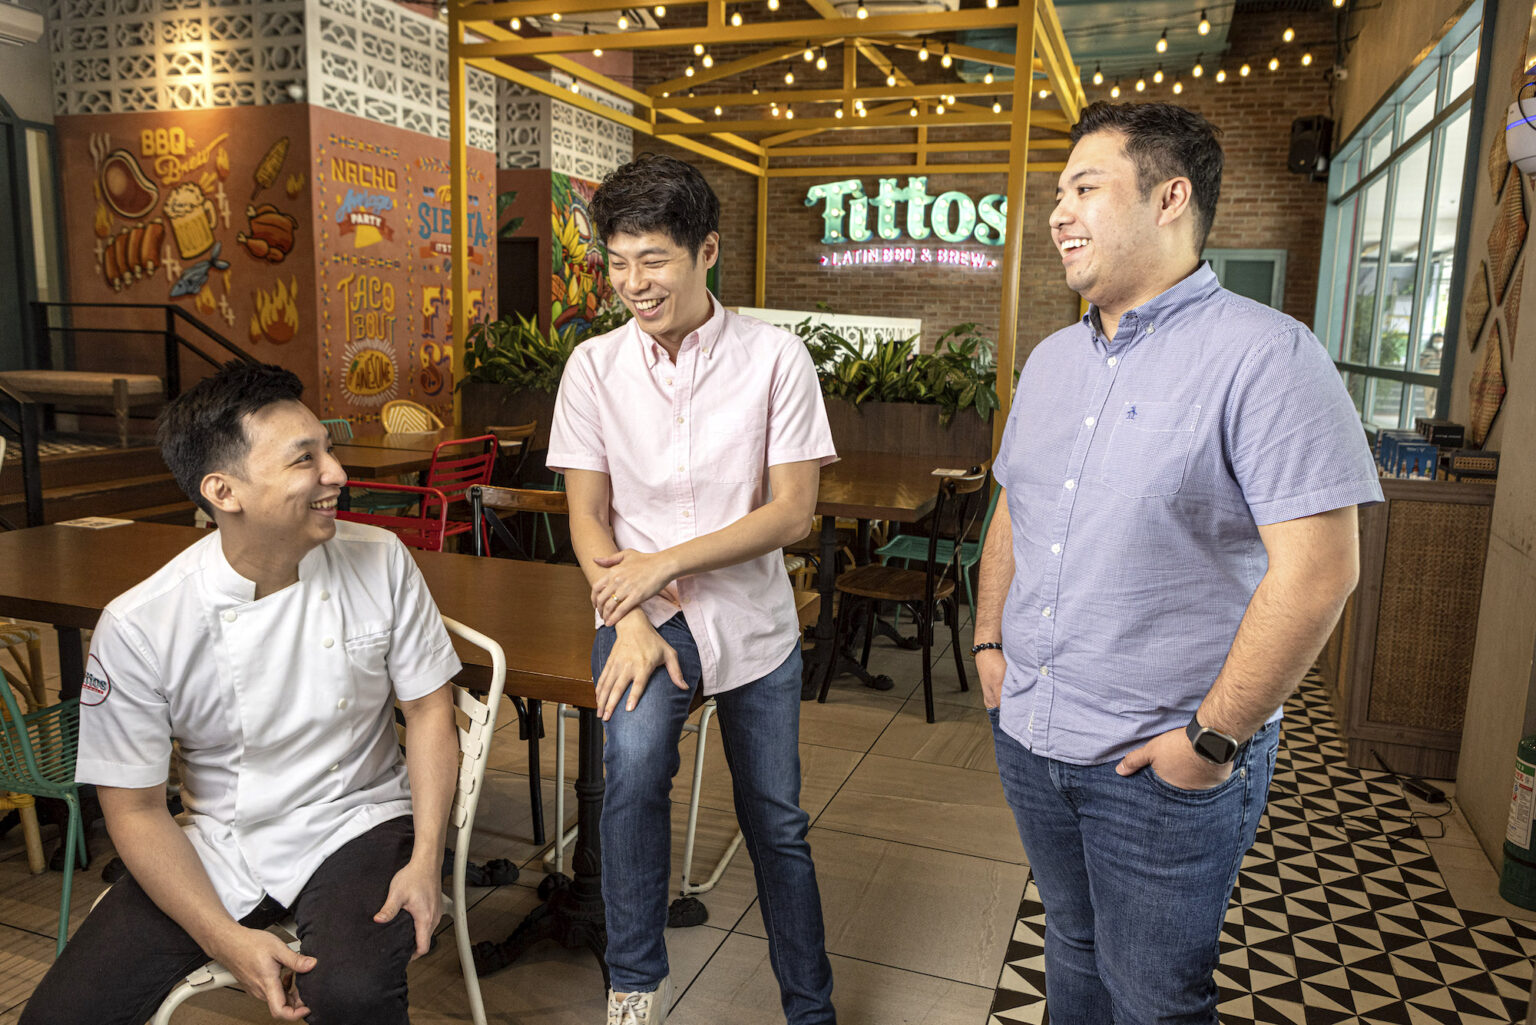 The Story of These ‘Inexperienced’ Yet Receptive Restaurateurs Is One of Survival and Perseverance